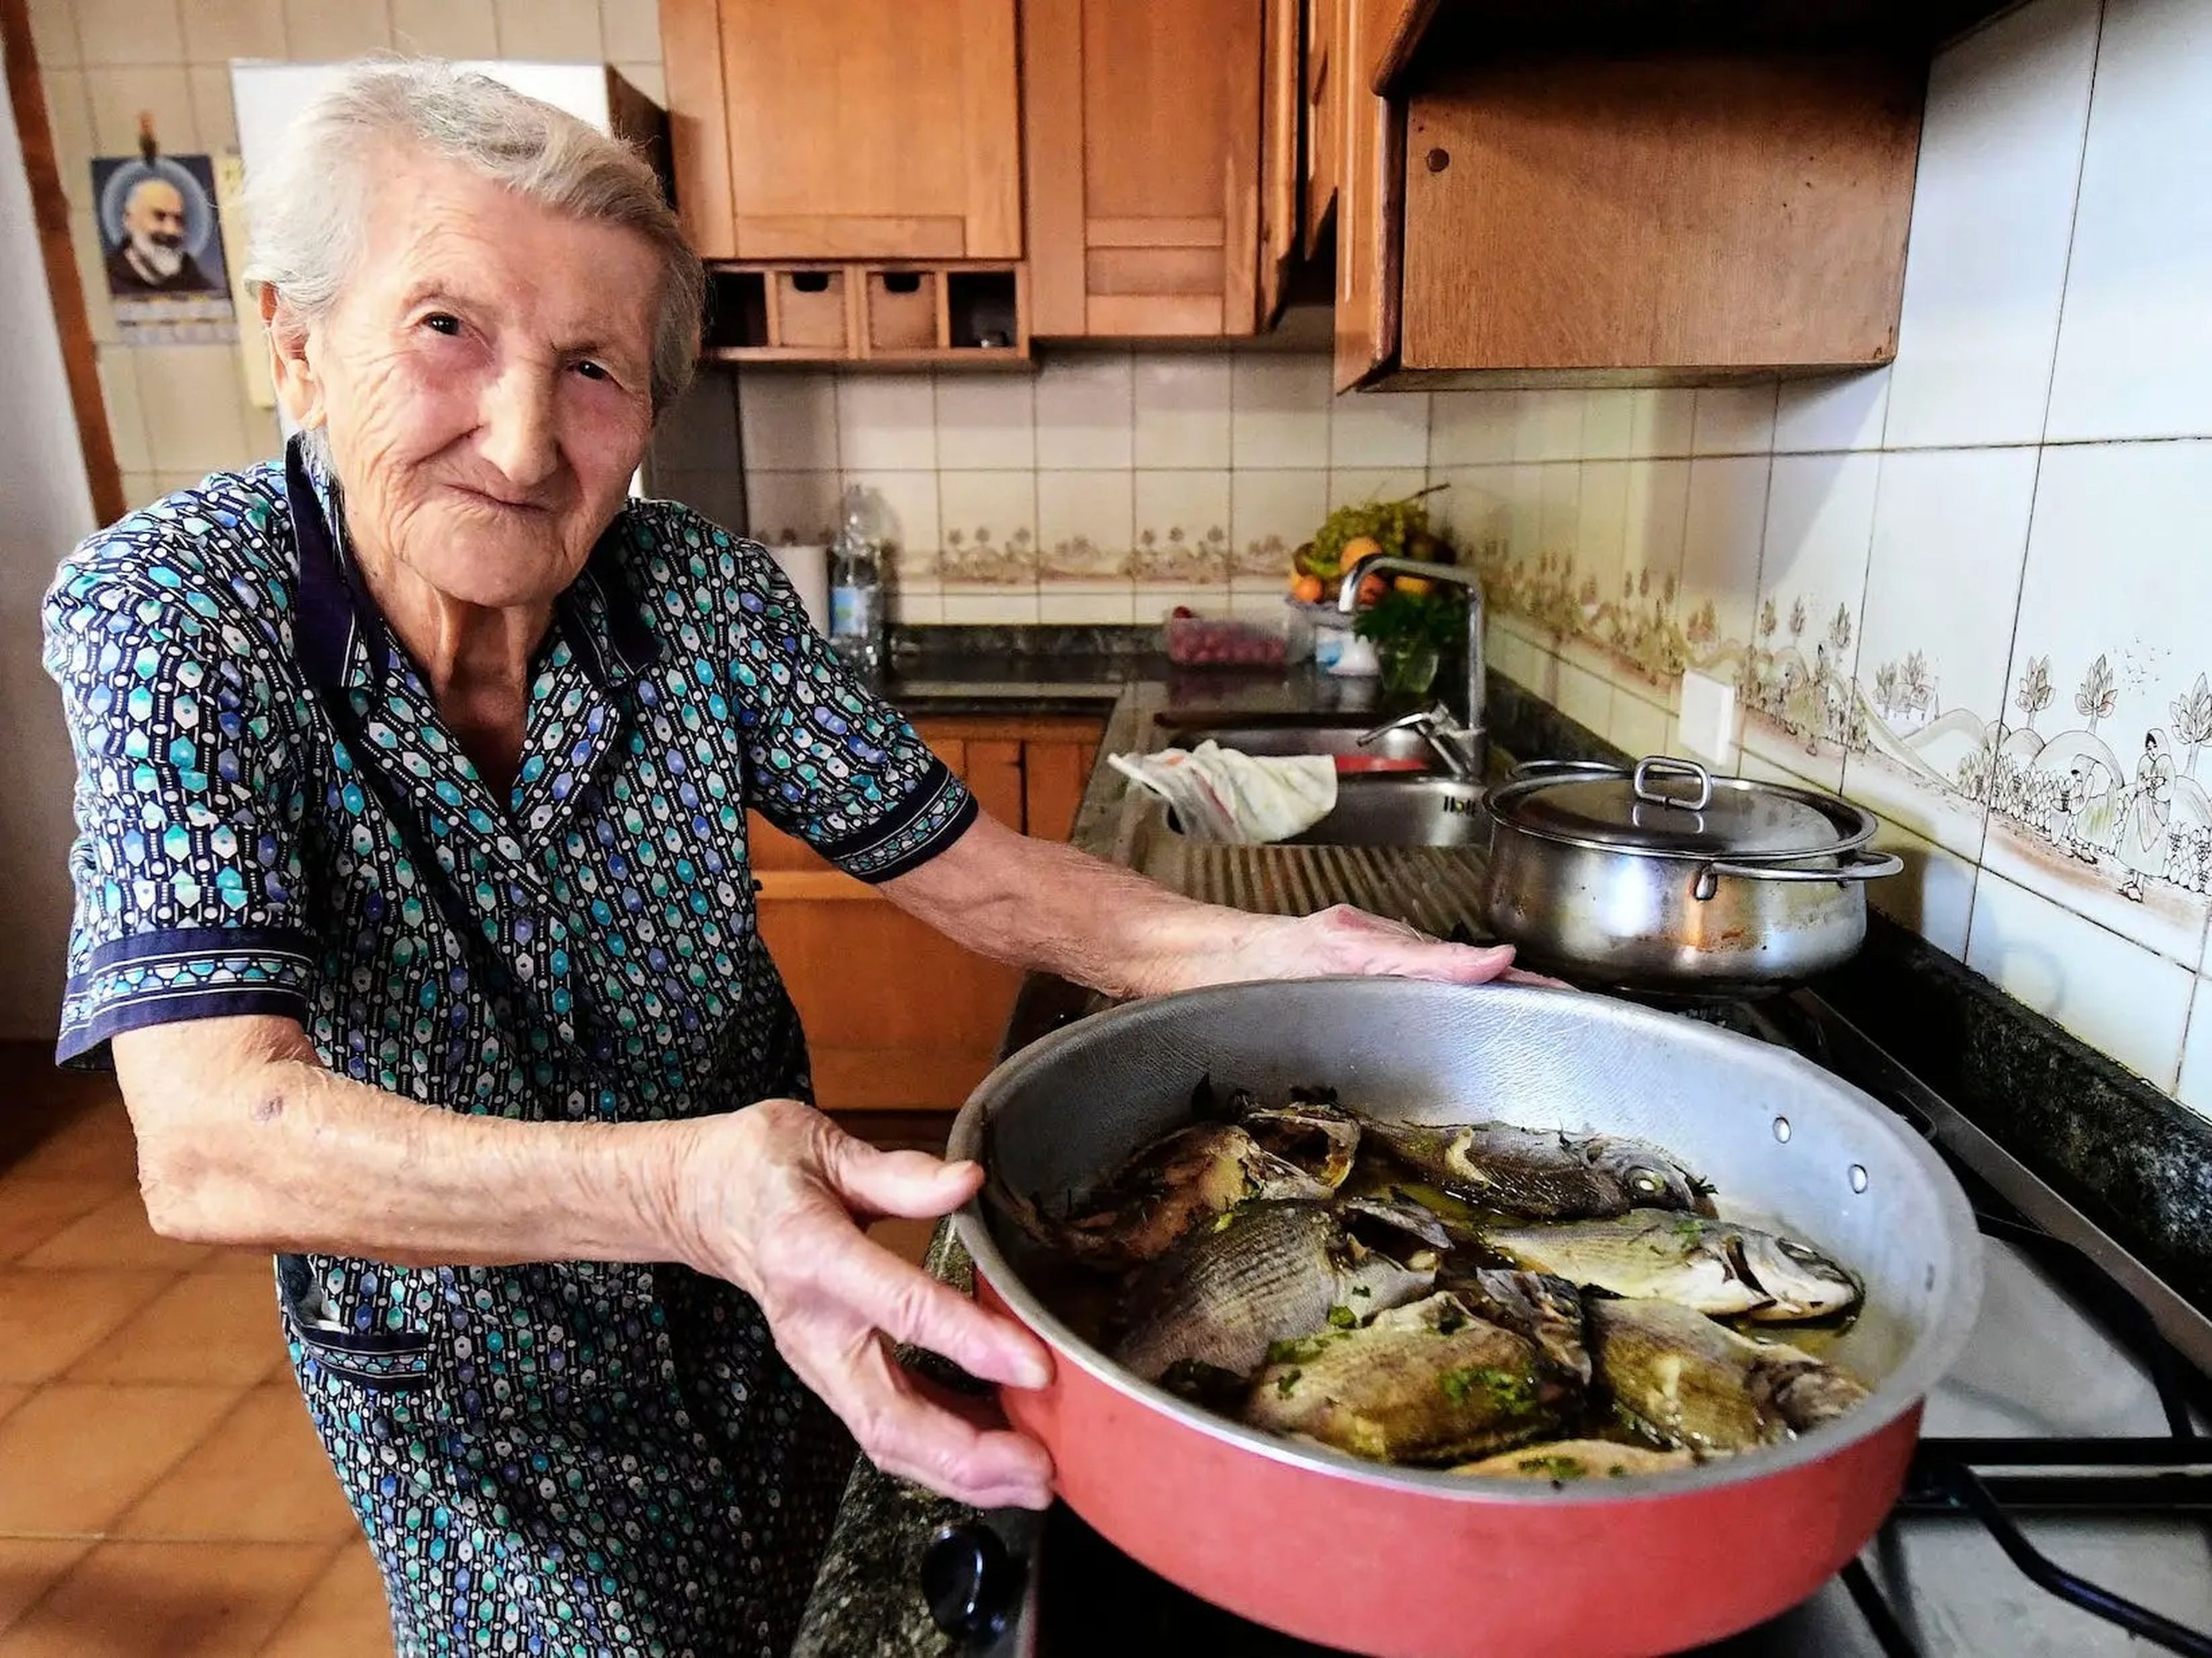 An old woman cooking fish in a large red pan in a small kitchen.